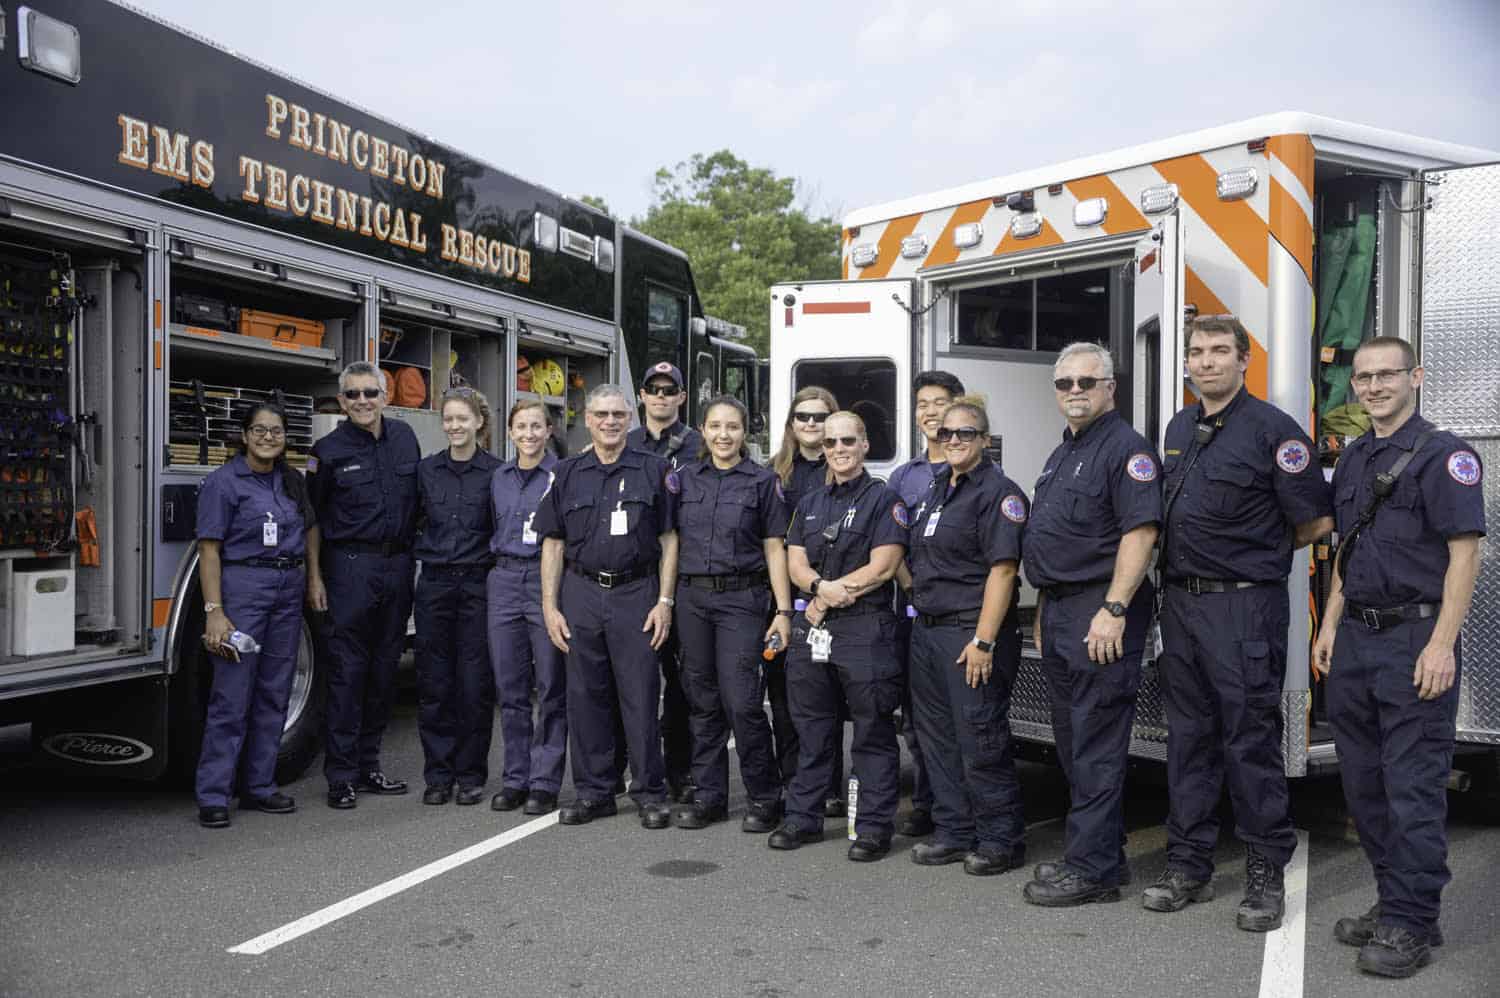 Princeton Fire Department and Princeton First Aid & Rescue Squad seek volunteers